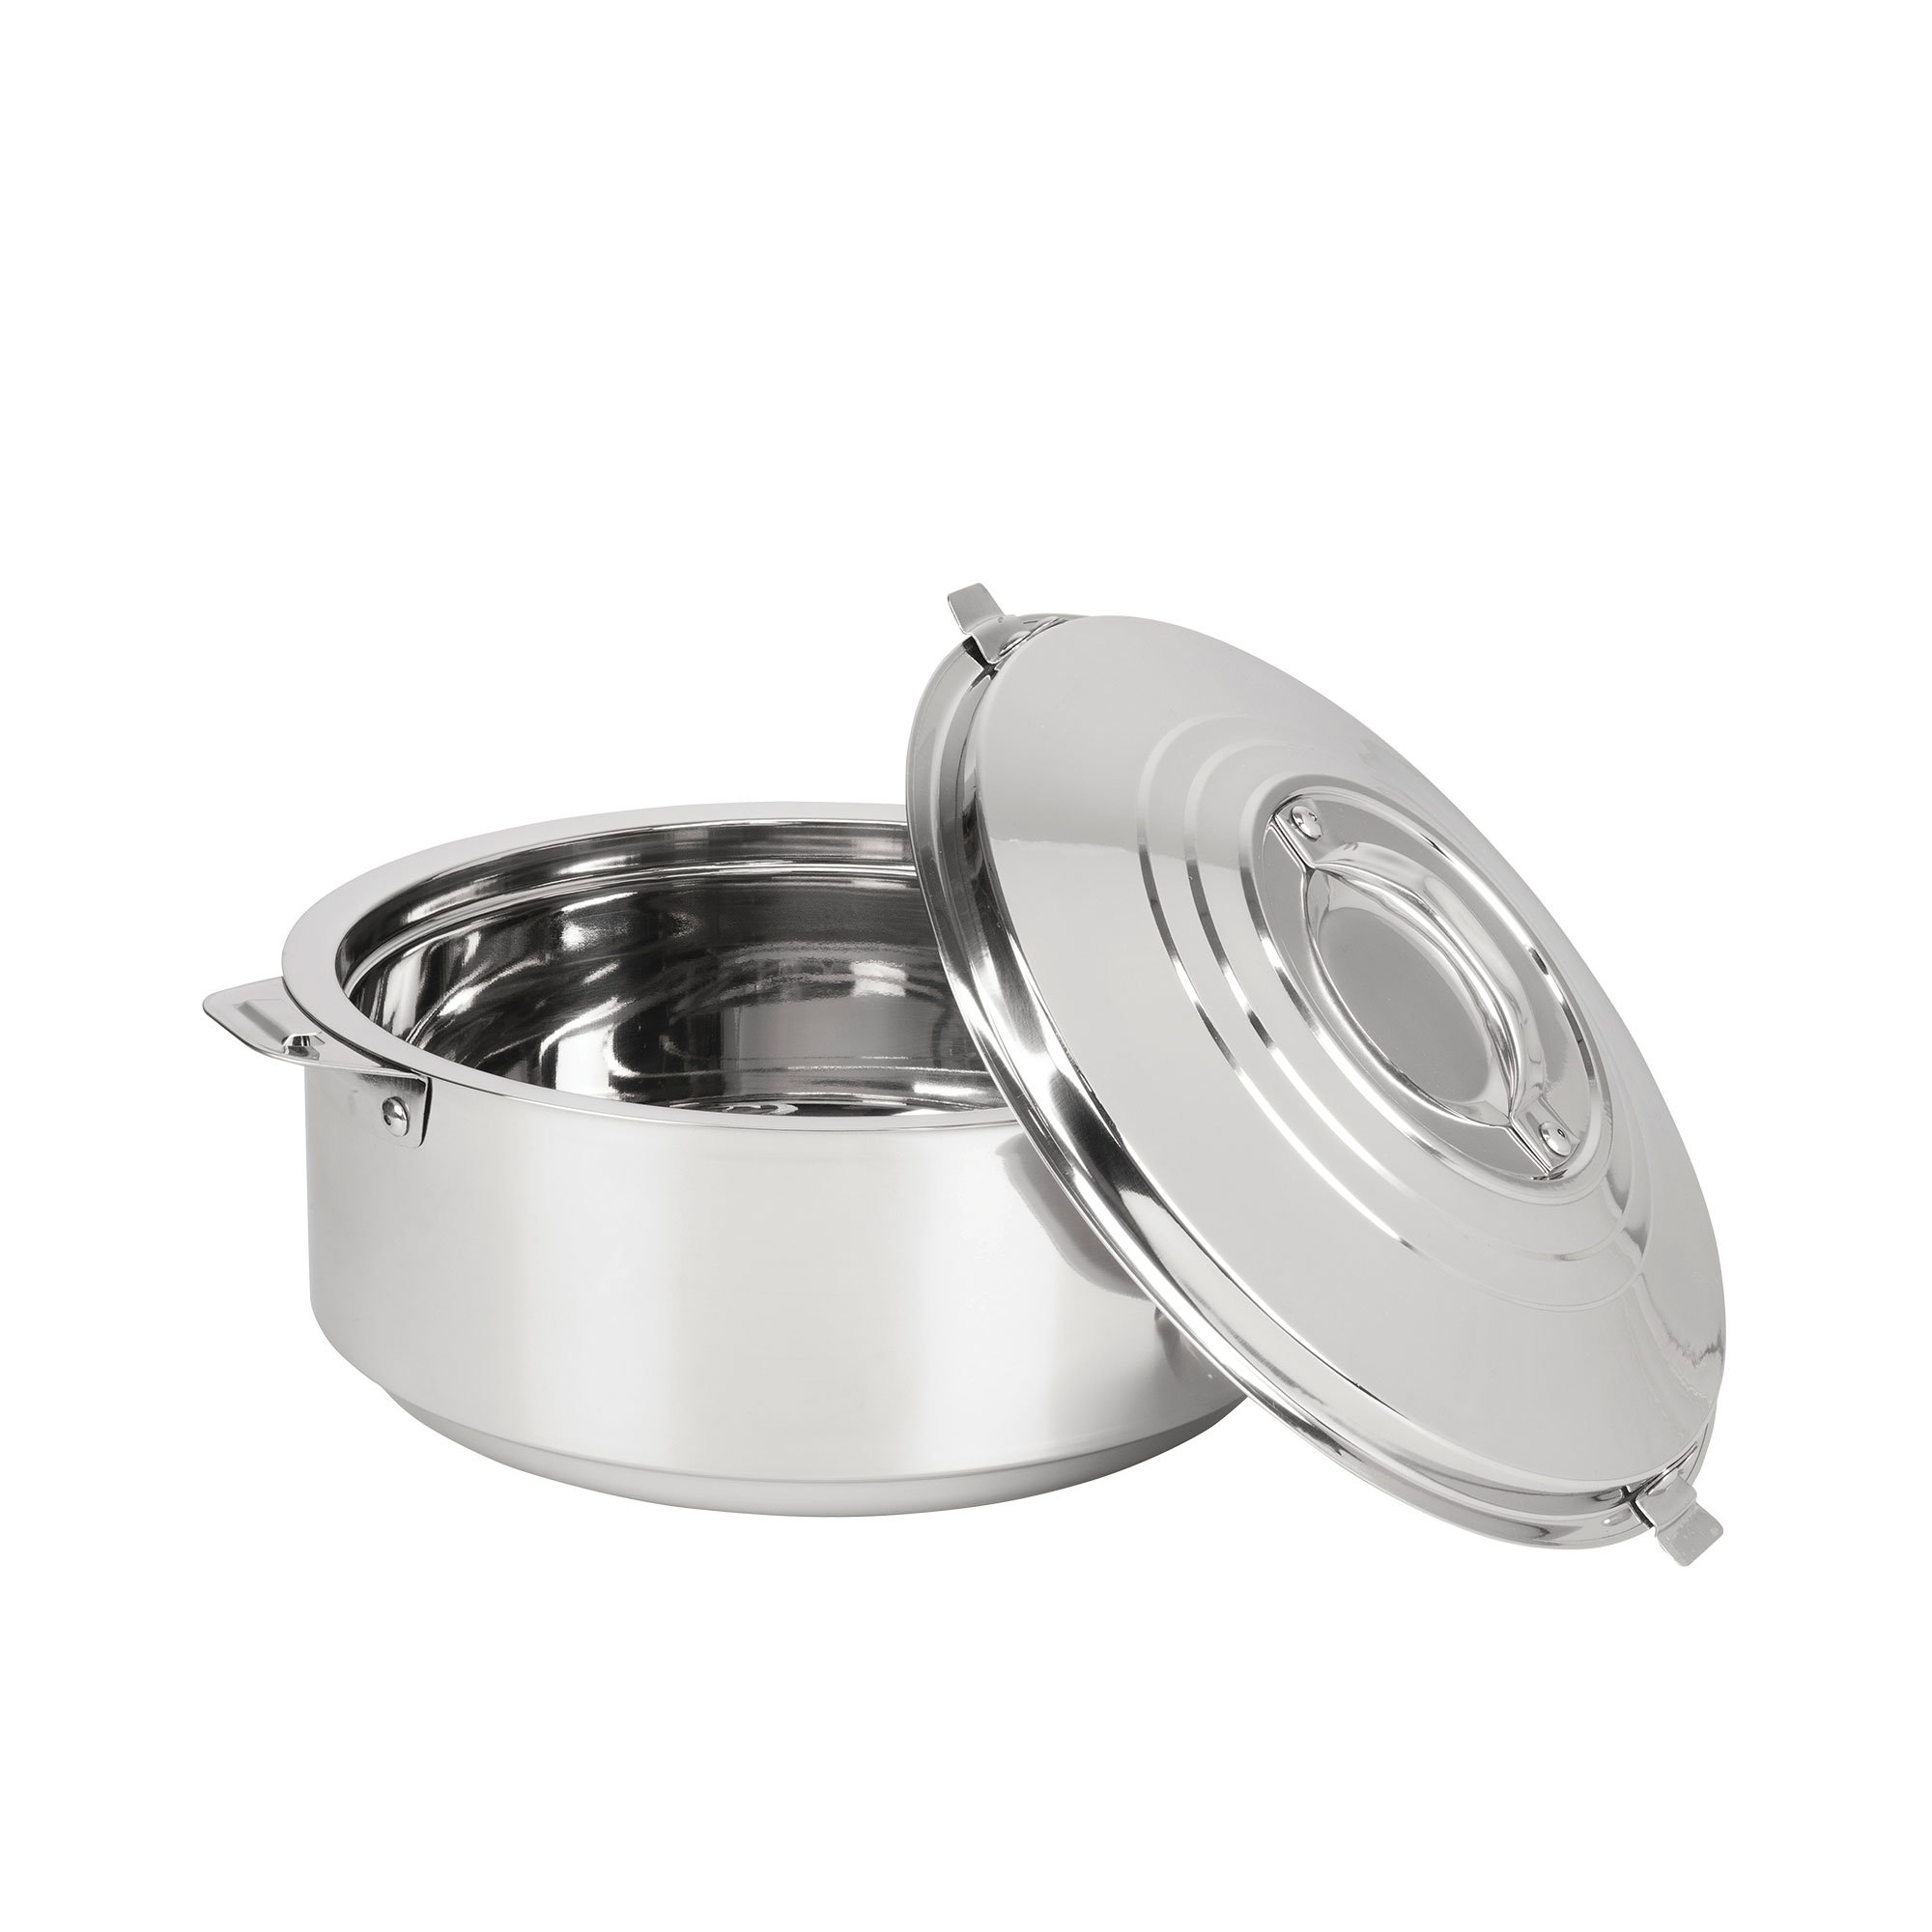 Pyrolux Stainless Steel Food Warmer 2.2L Image 1